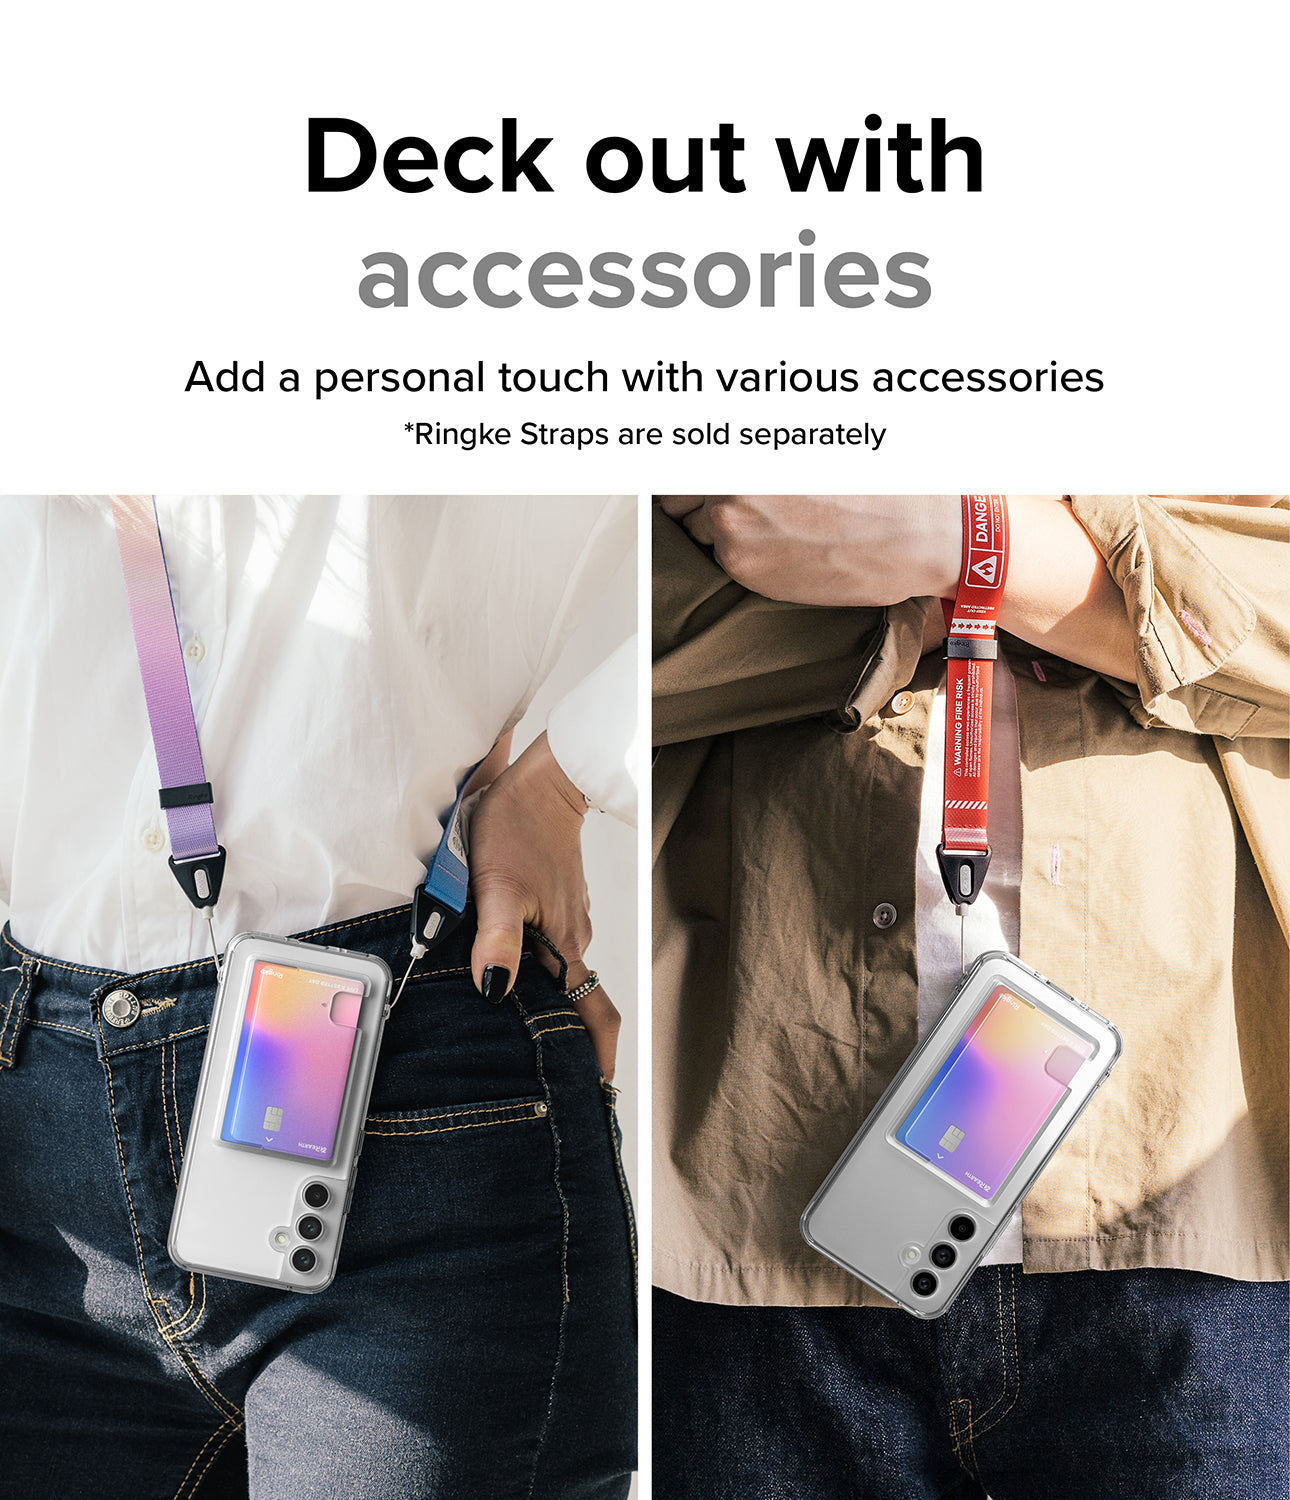 Add a personal touch with various accessories